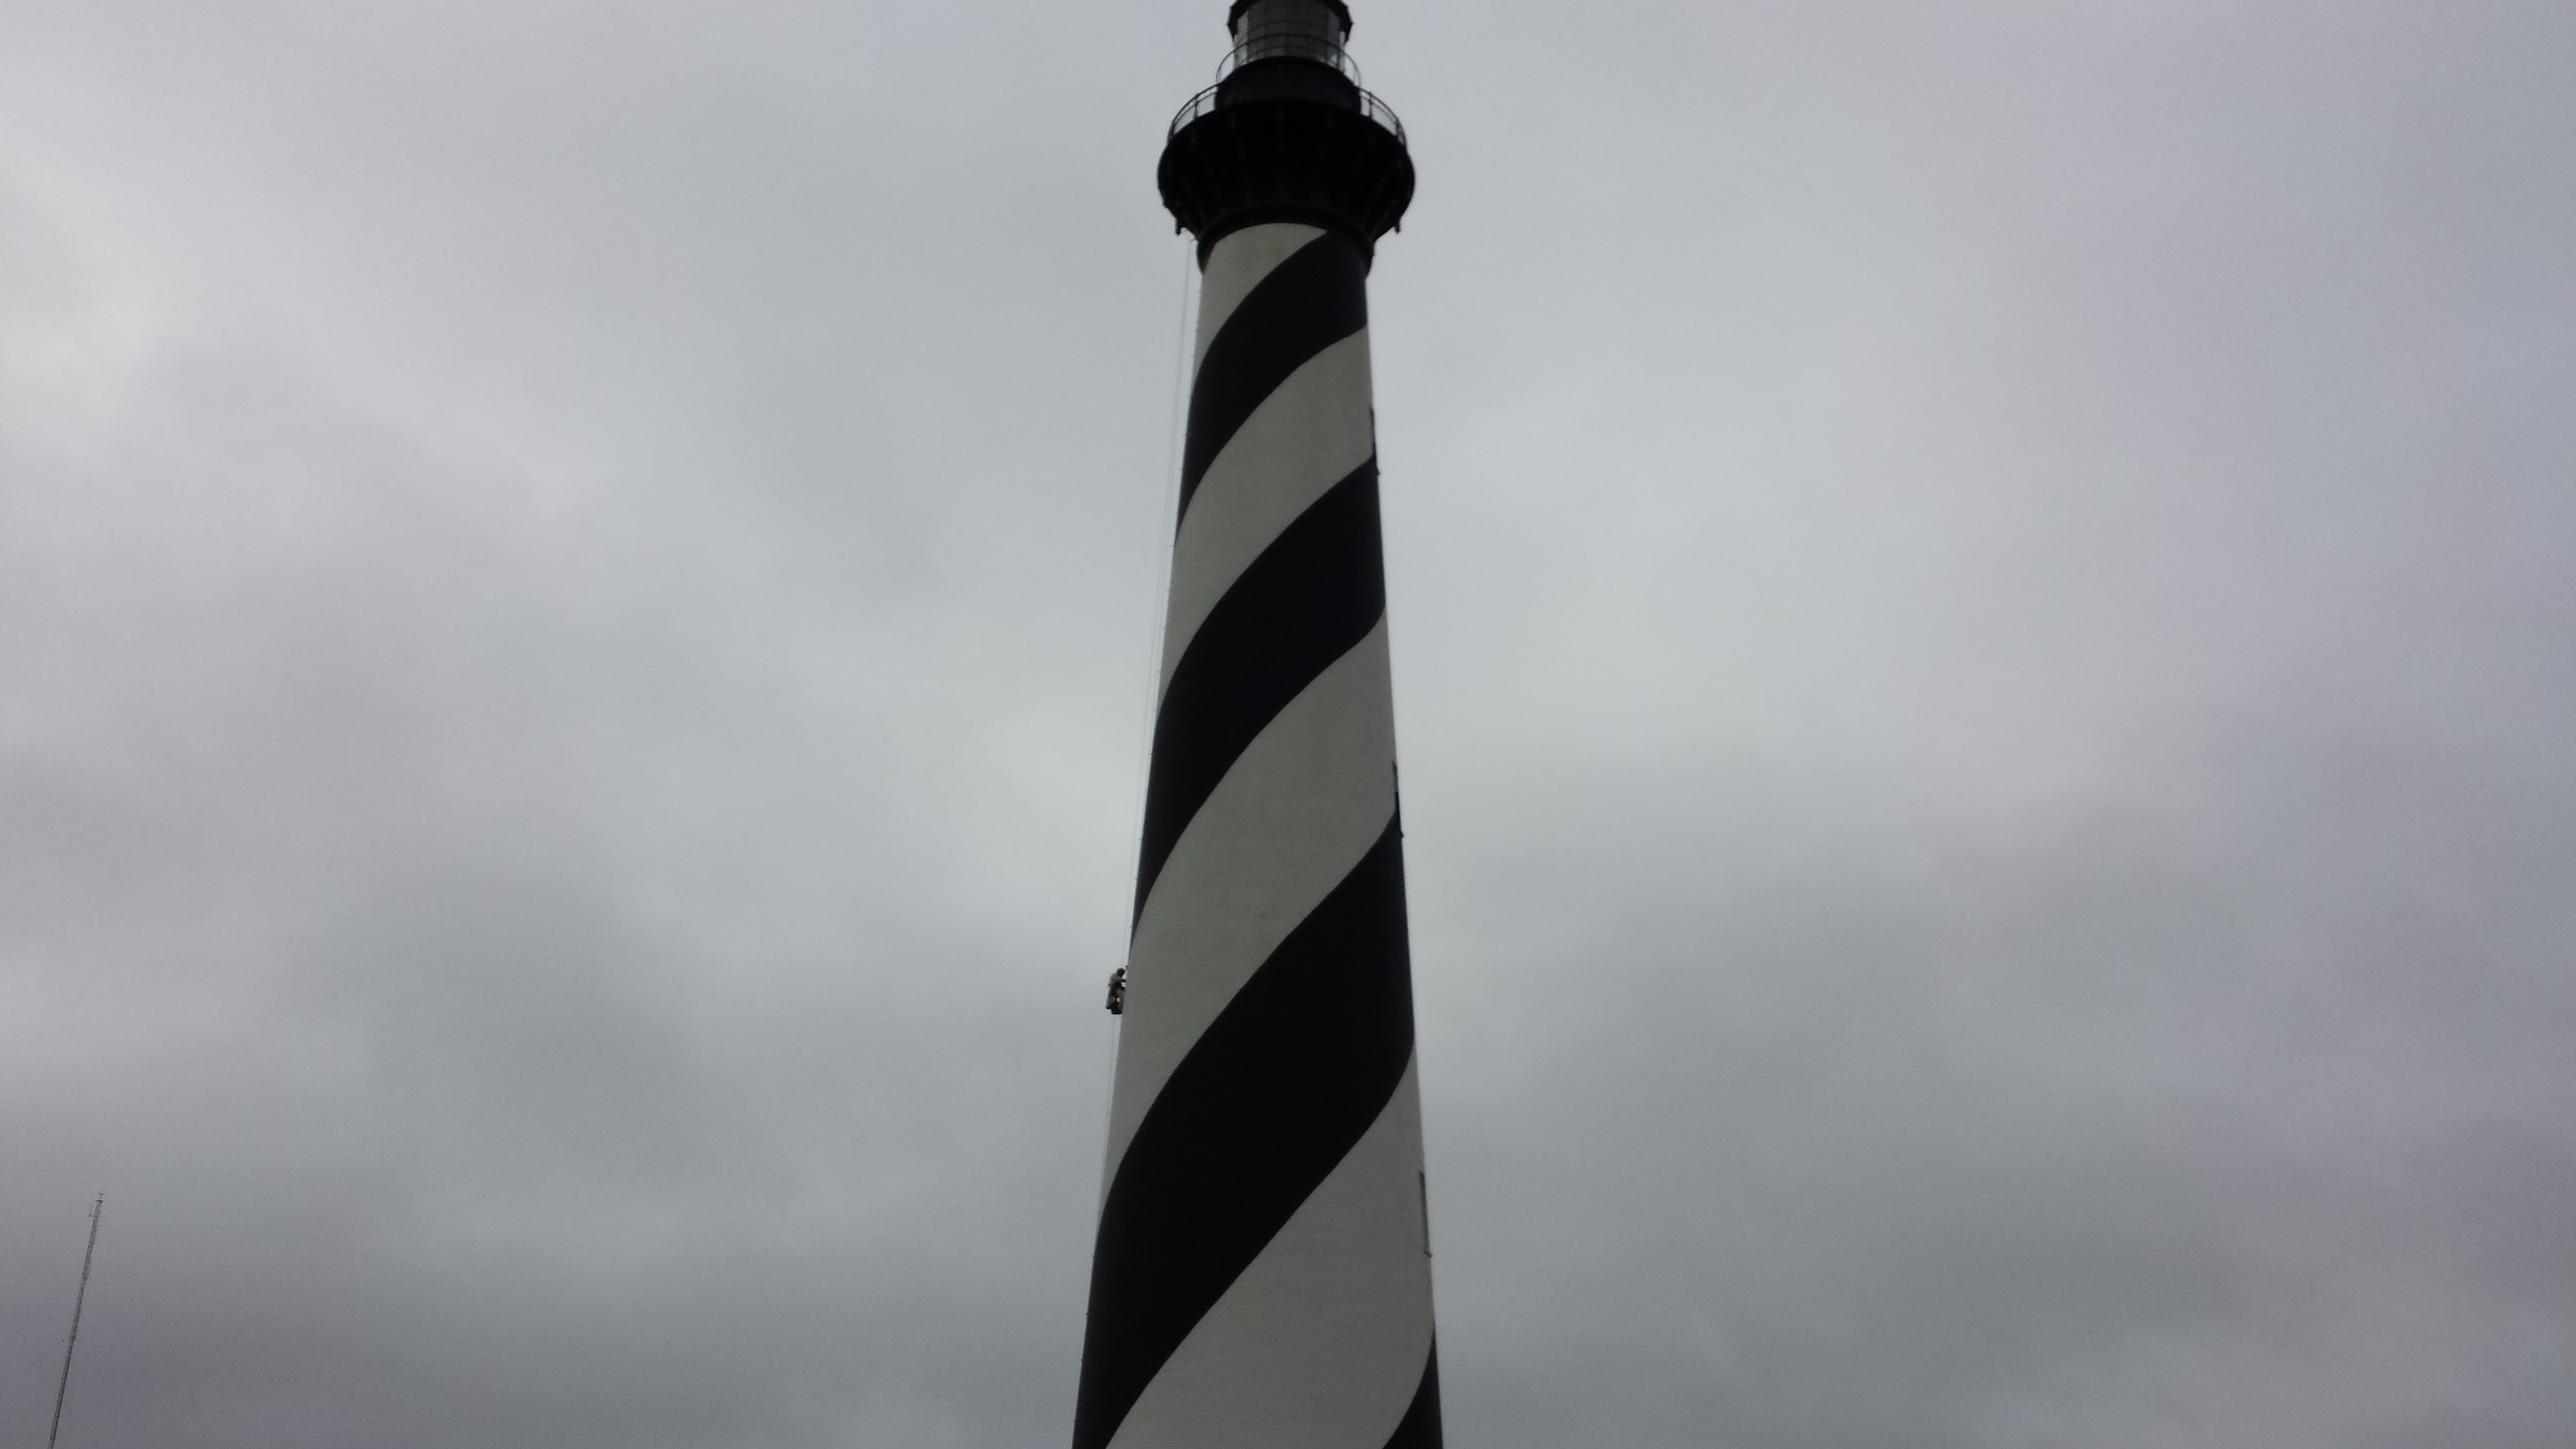 Cape Hatteras Lighthouse during inspection. NPS Photo